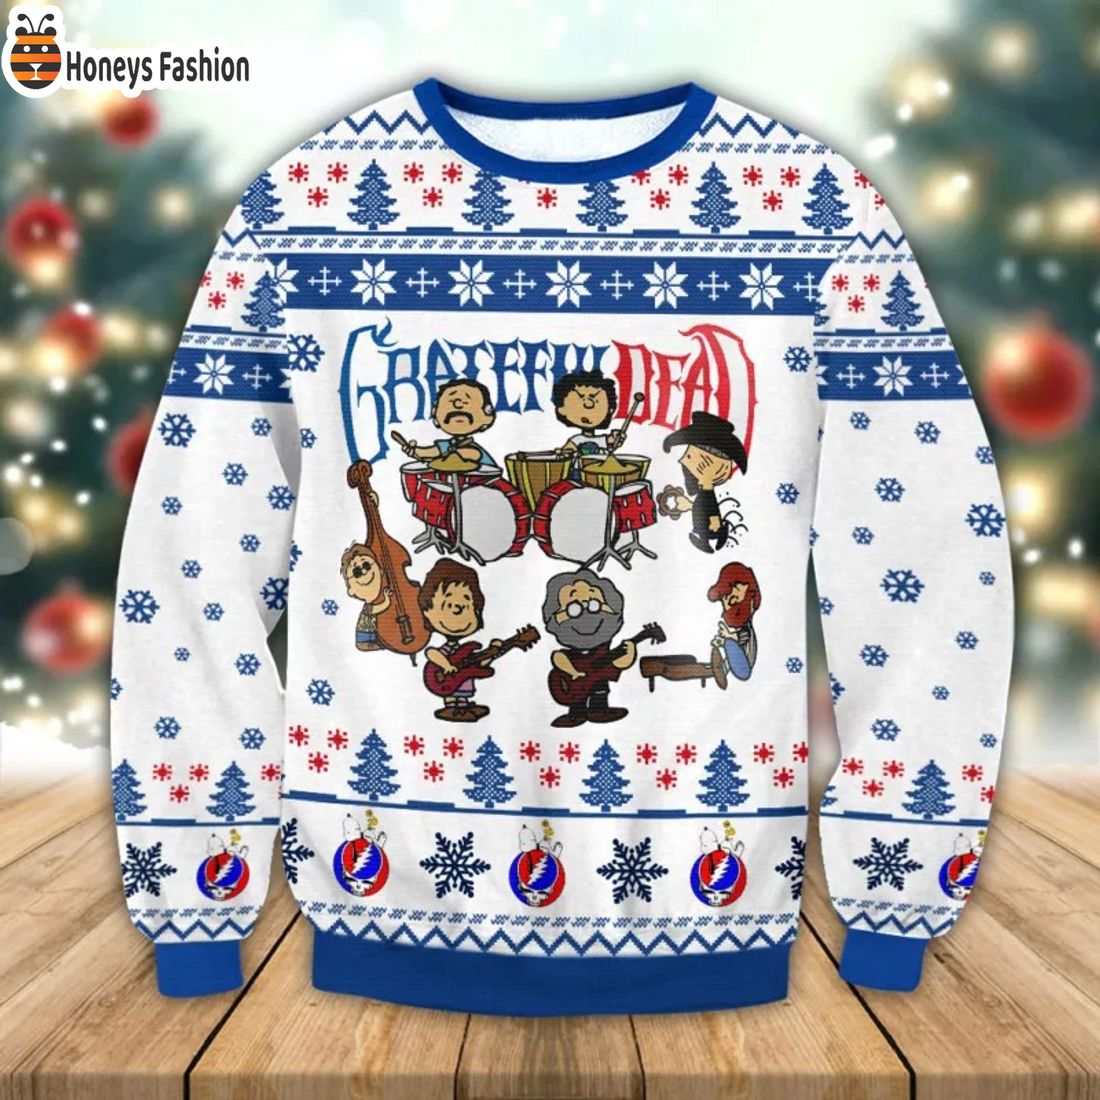 HOT HOT HOT Snoopy Greatful Dead Ugly Christmas Sweater